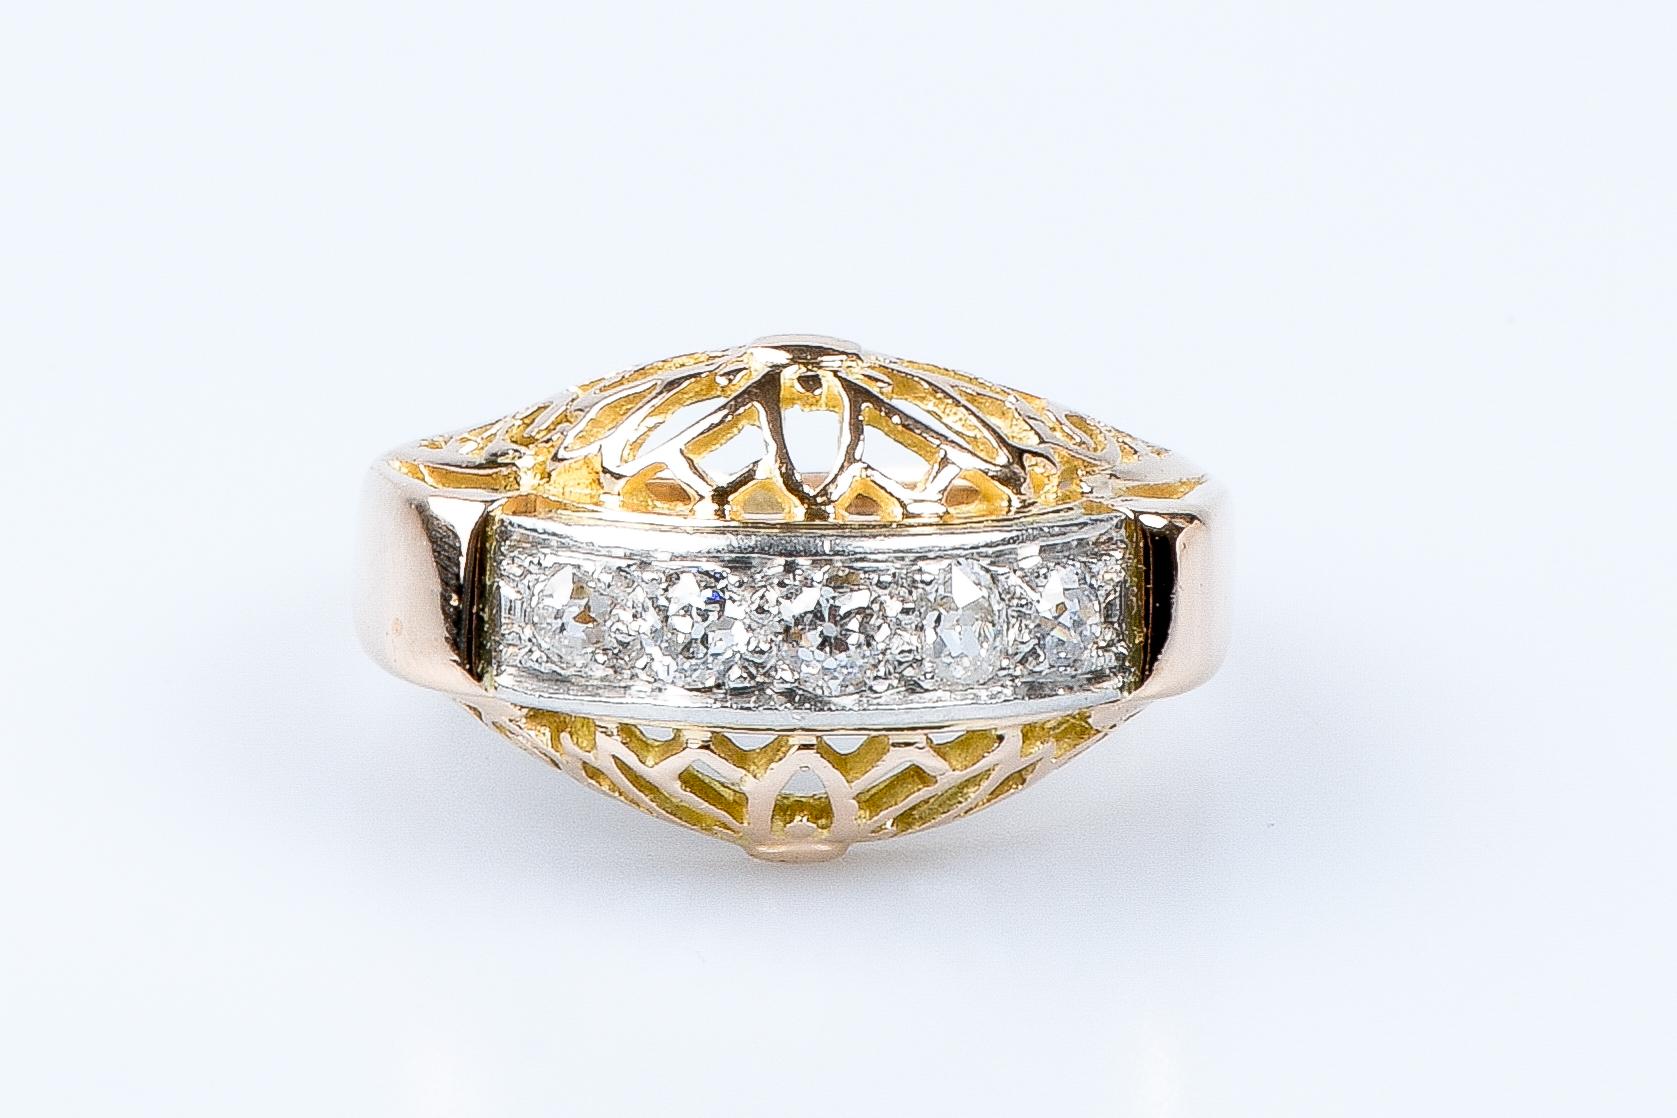 For Sale:  18 carat yellow and white gold ring designed with 5 round brillant cut diamonds 3